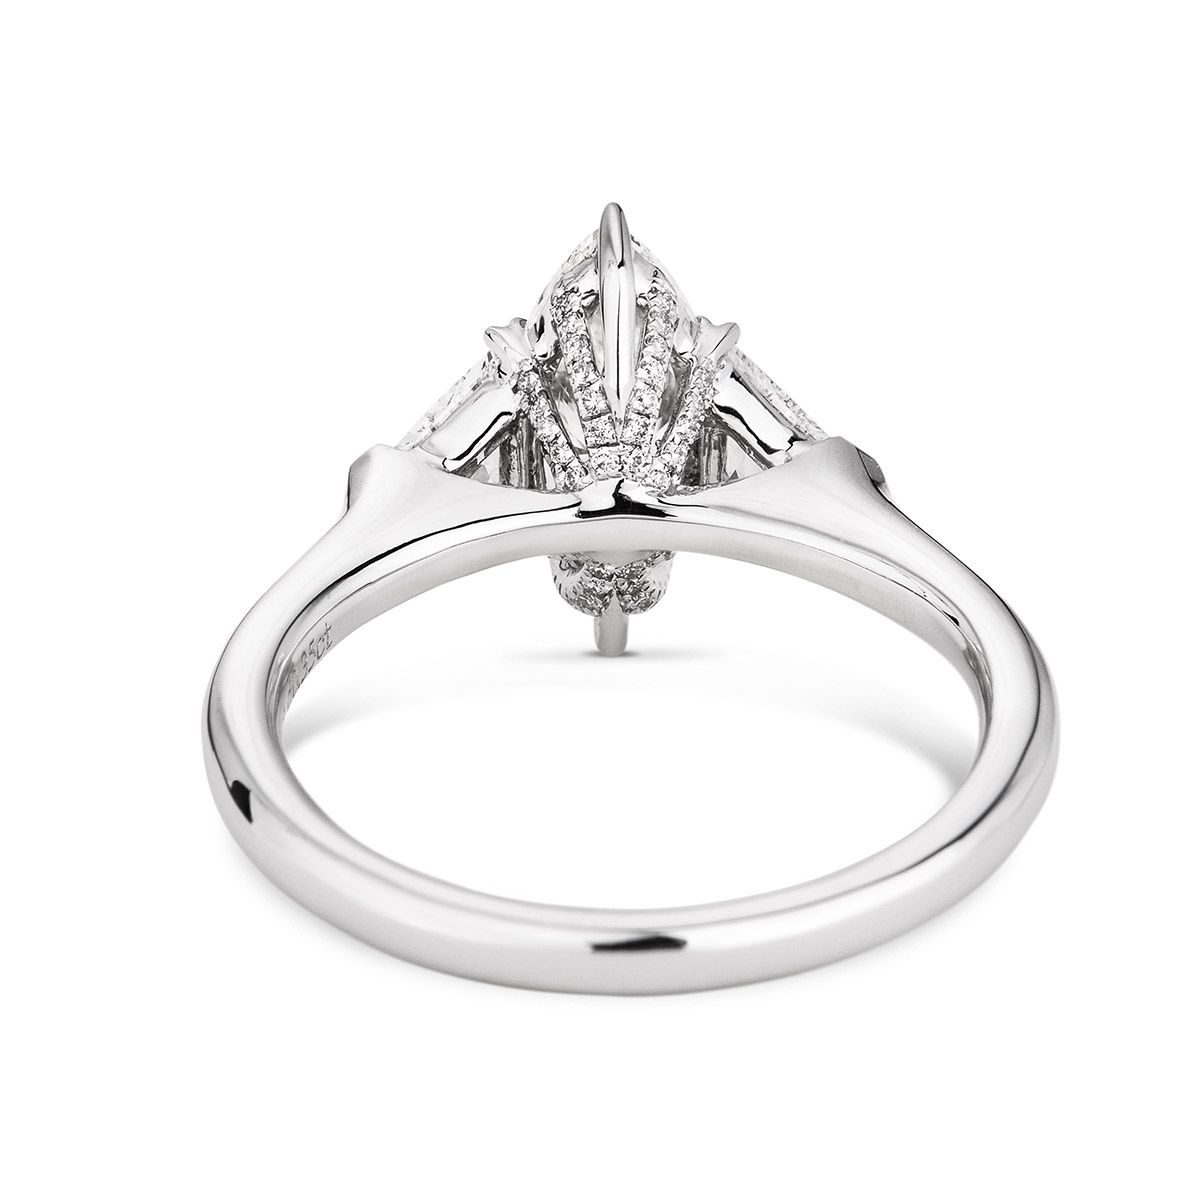  White Diamond Ring, 1.01 Ct. (1.36 Ct. TW), Marquise shape, GIA Certified, 2194902167